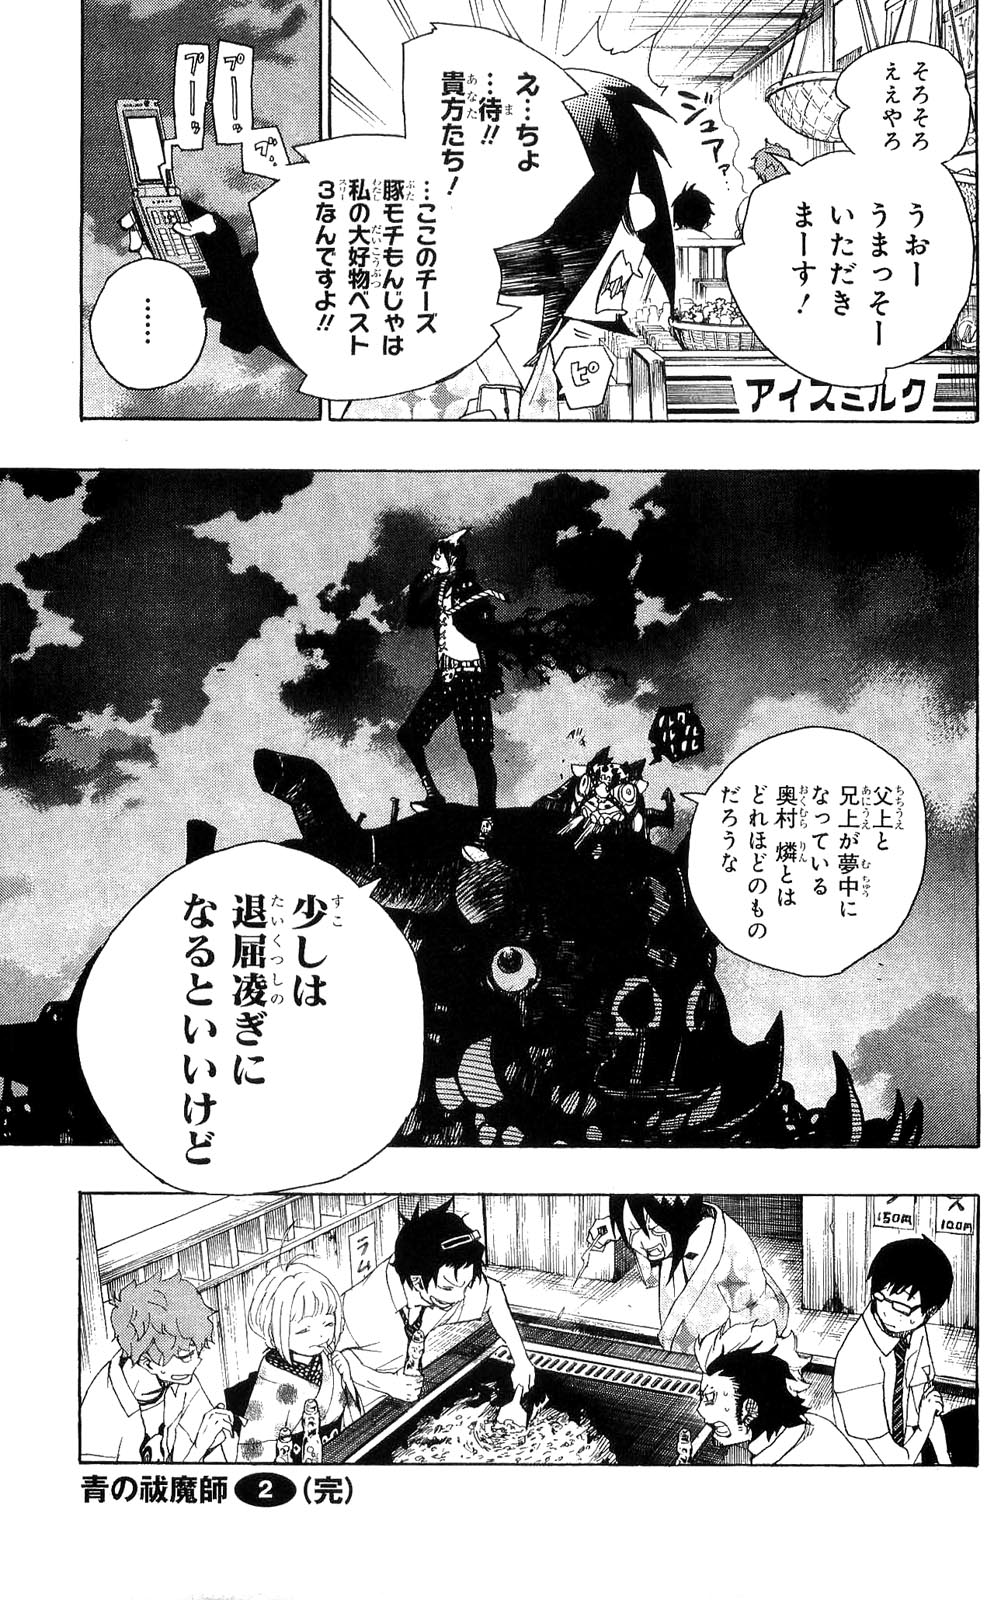 Ao no Exorcist - Chapter 7 - Page 45